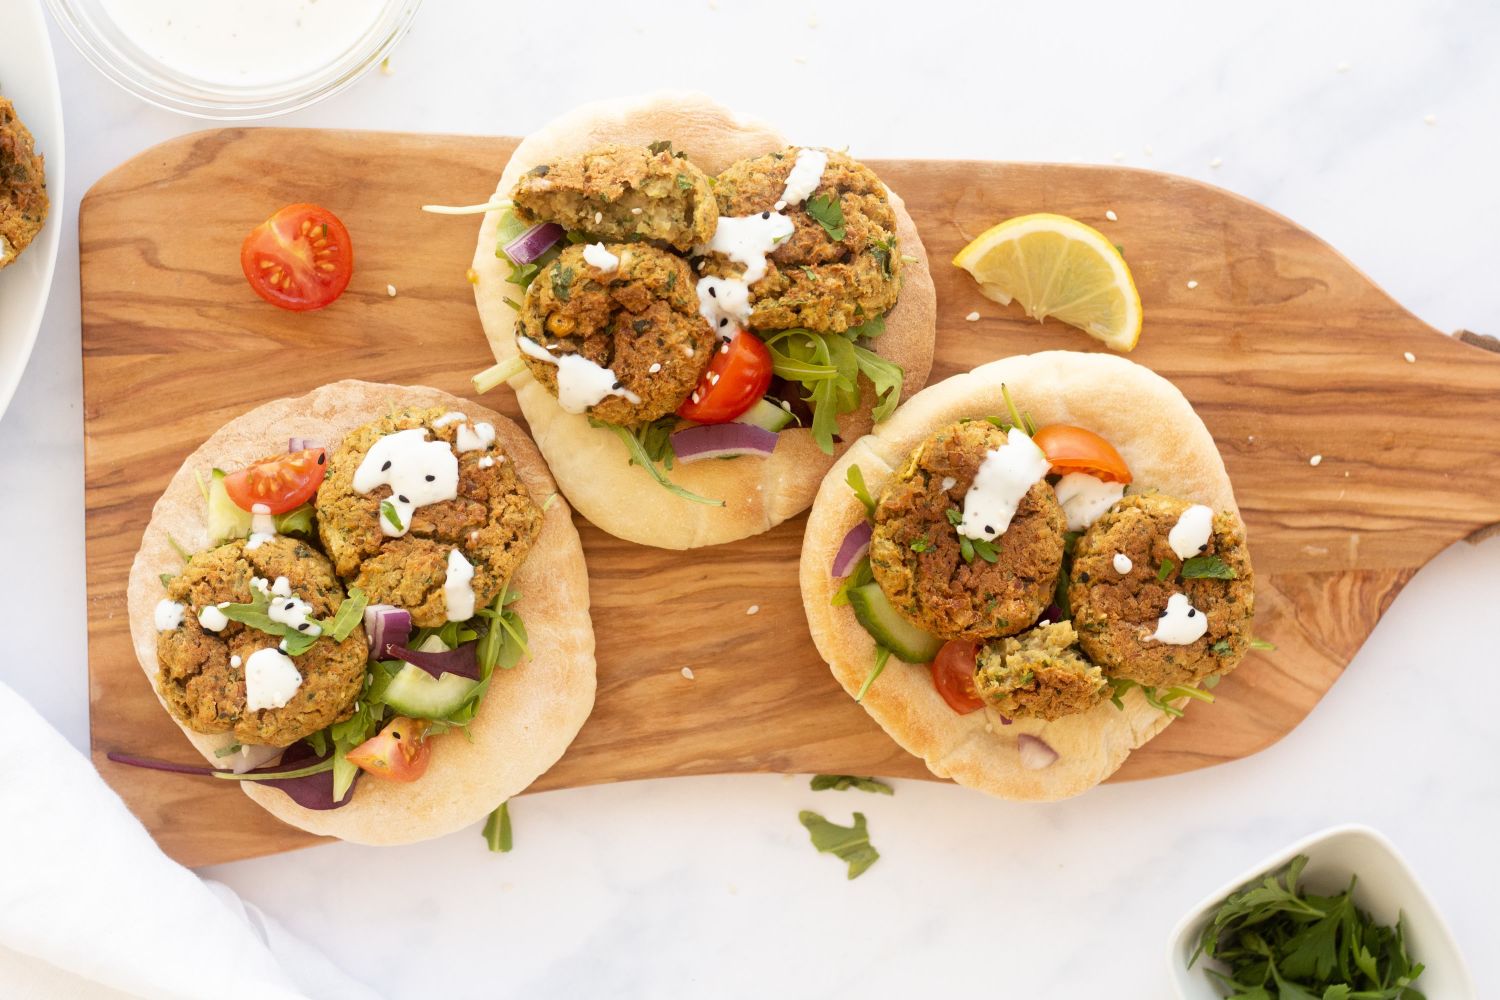 Baked falafel made with chickpeas and fresh herbs served with fresh vegetables, pita bread, and tahini.